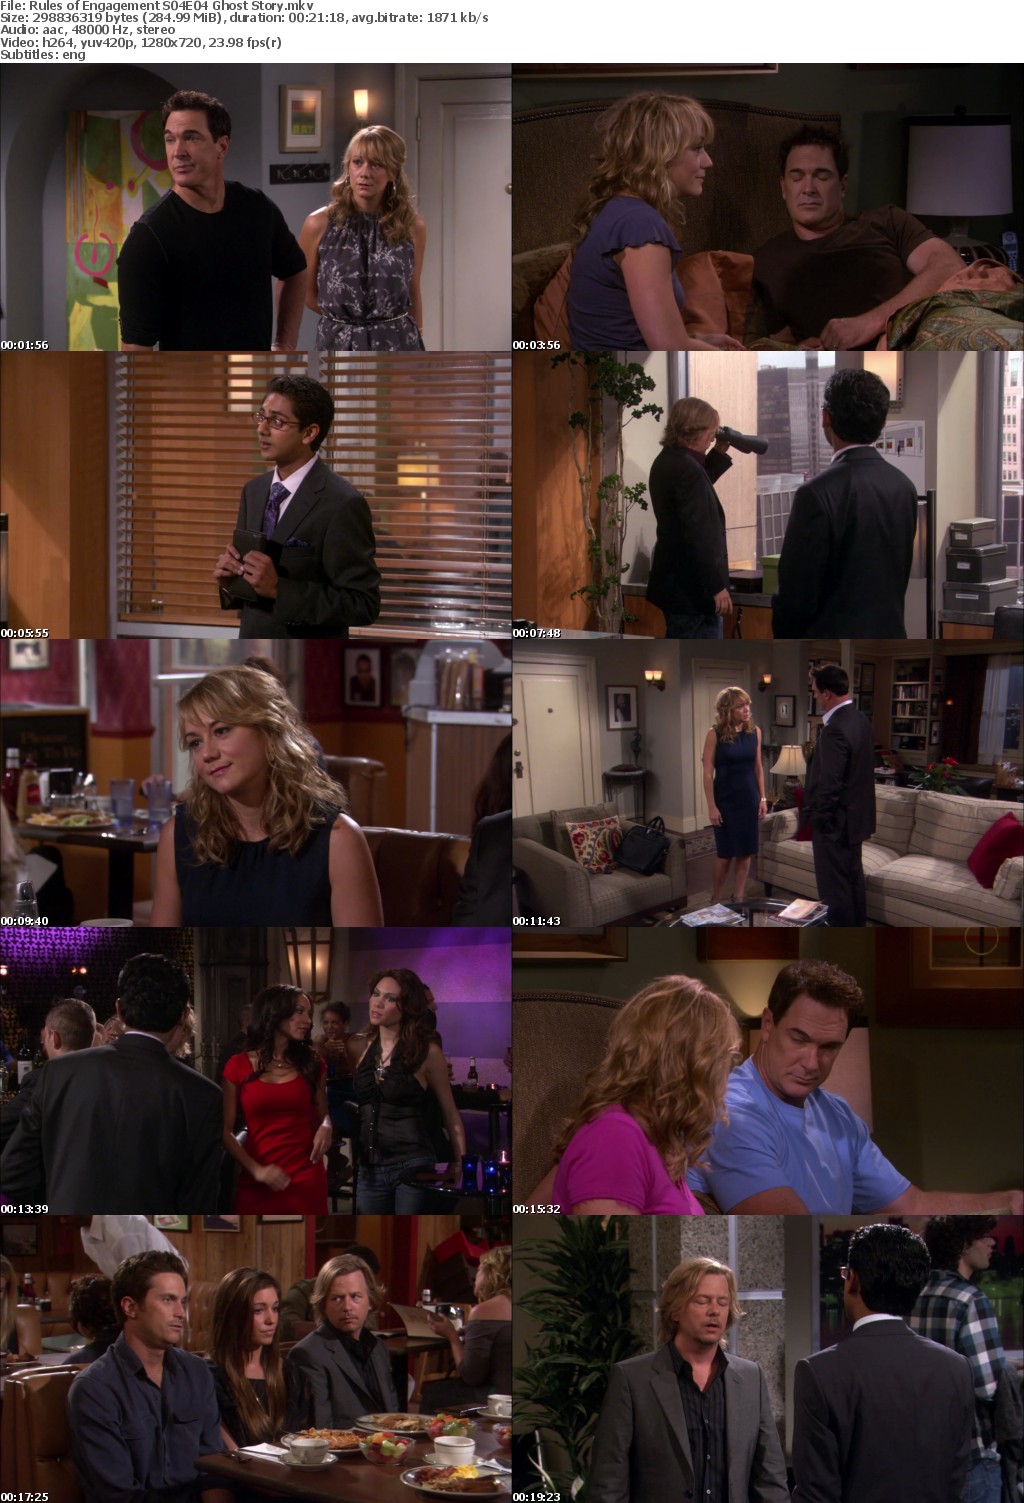 Rules of Engagement 2007 Season 4 Complete 720p NF WEBRip x264 i c